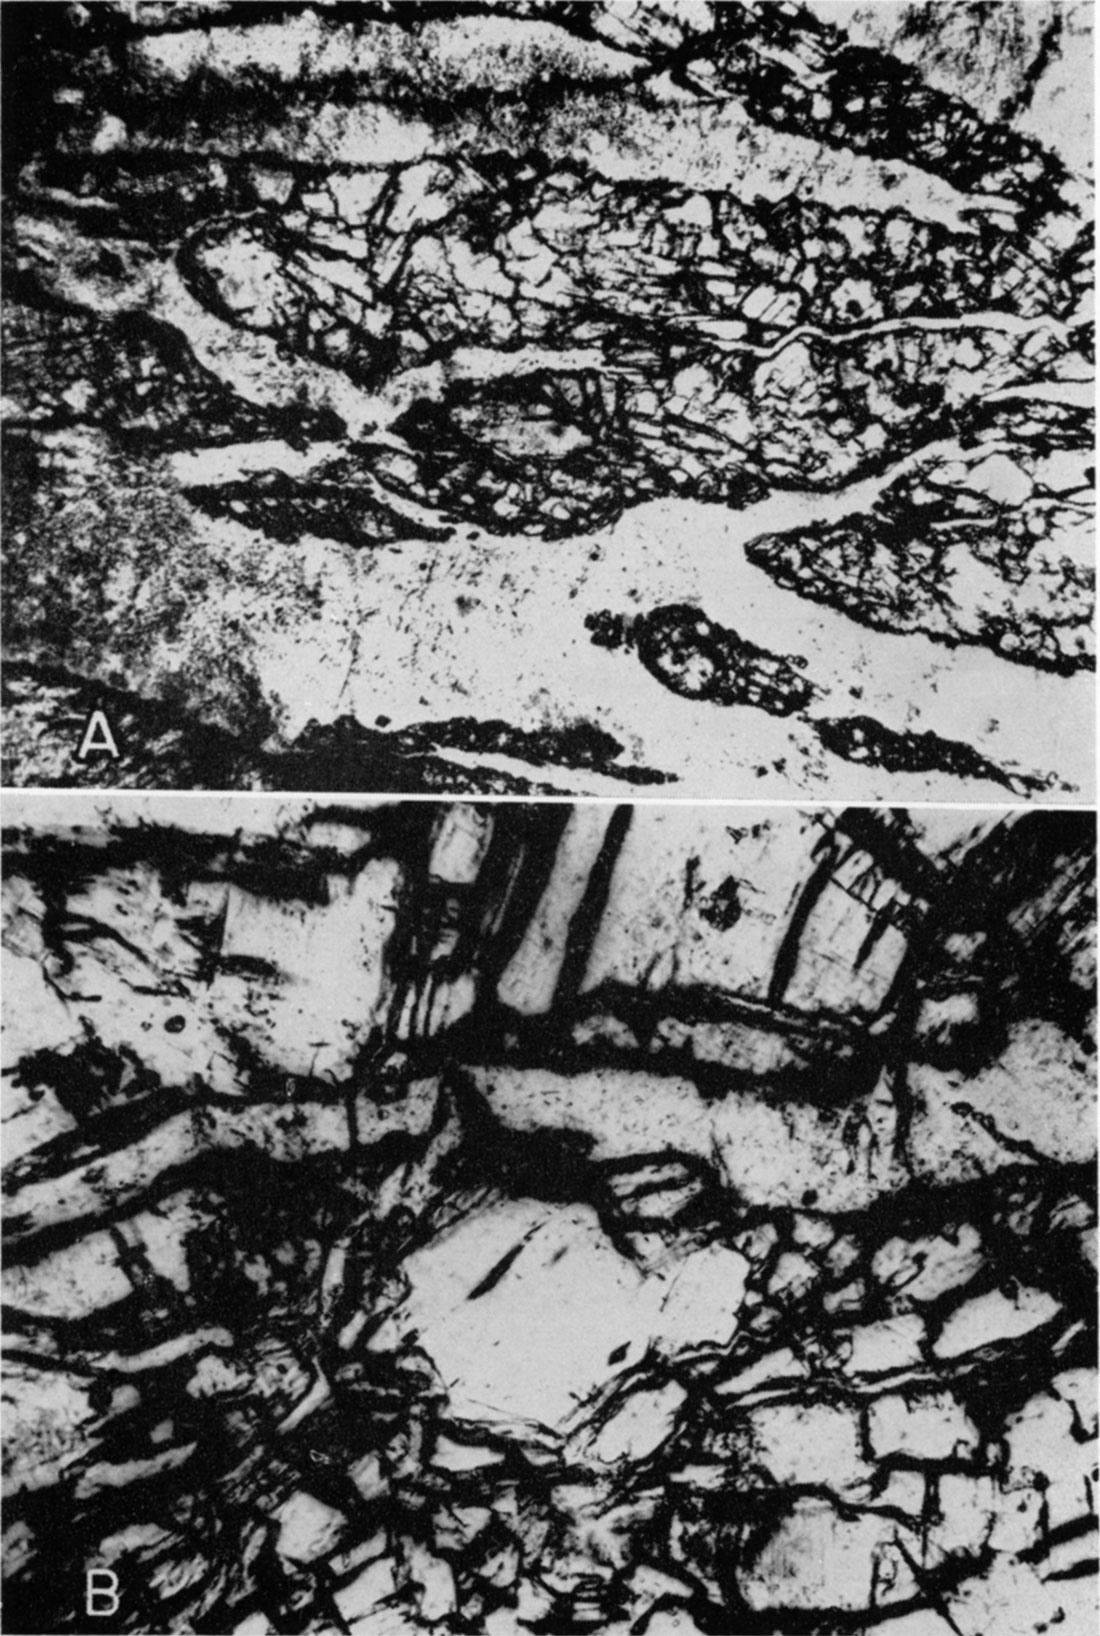 Two black and white photos; photomicrographs of gypsum veinlets penetrating anhydrite.